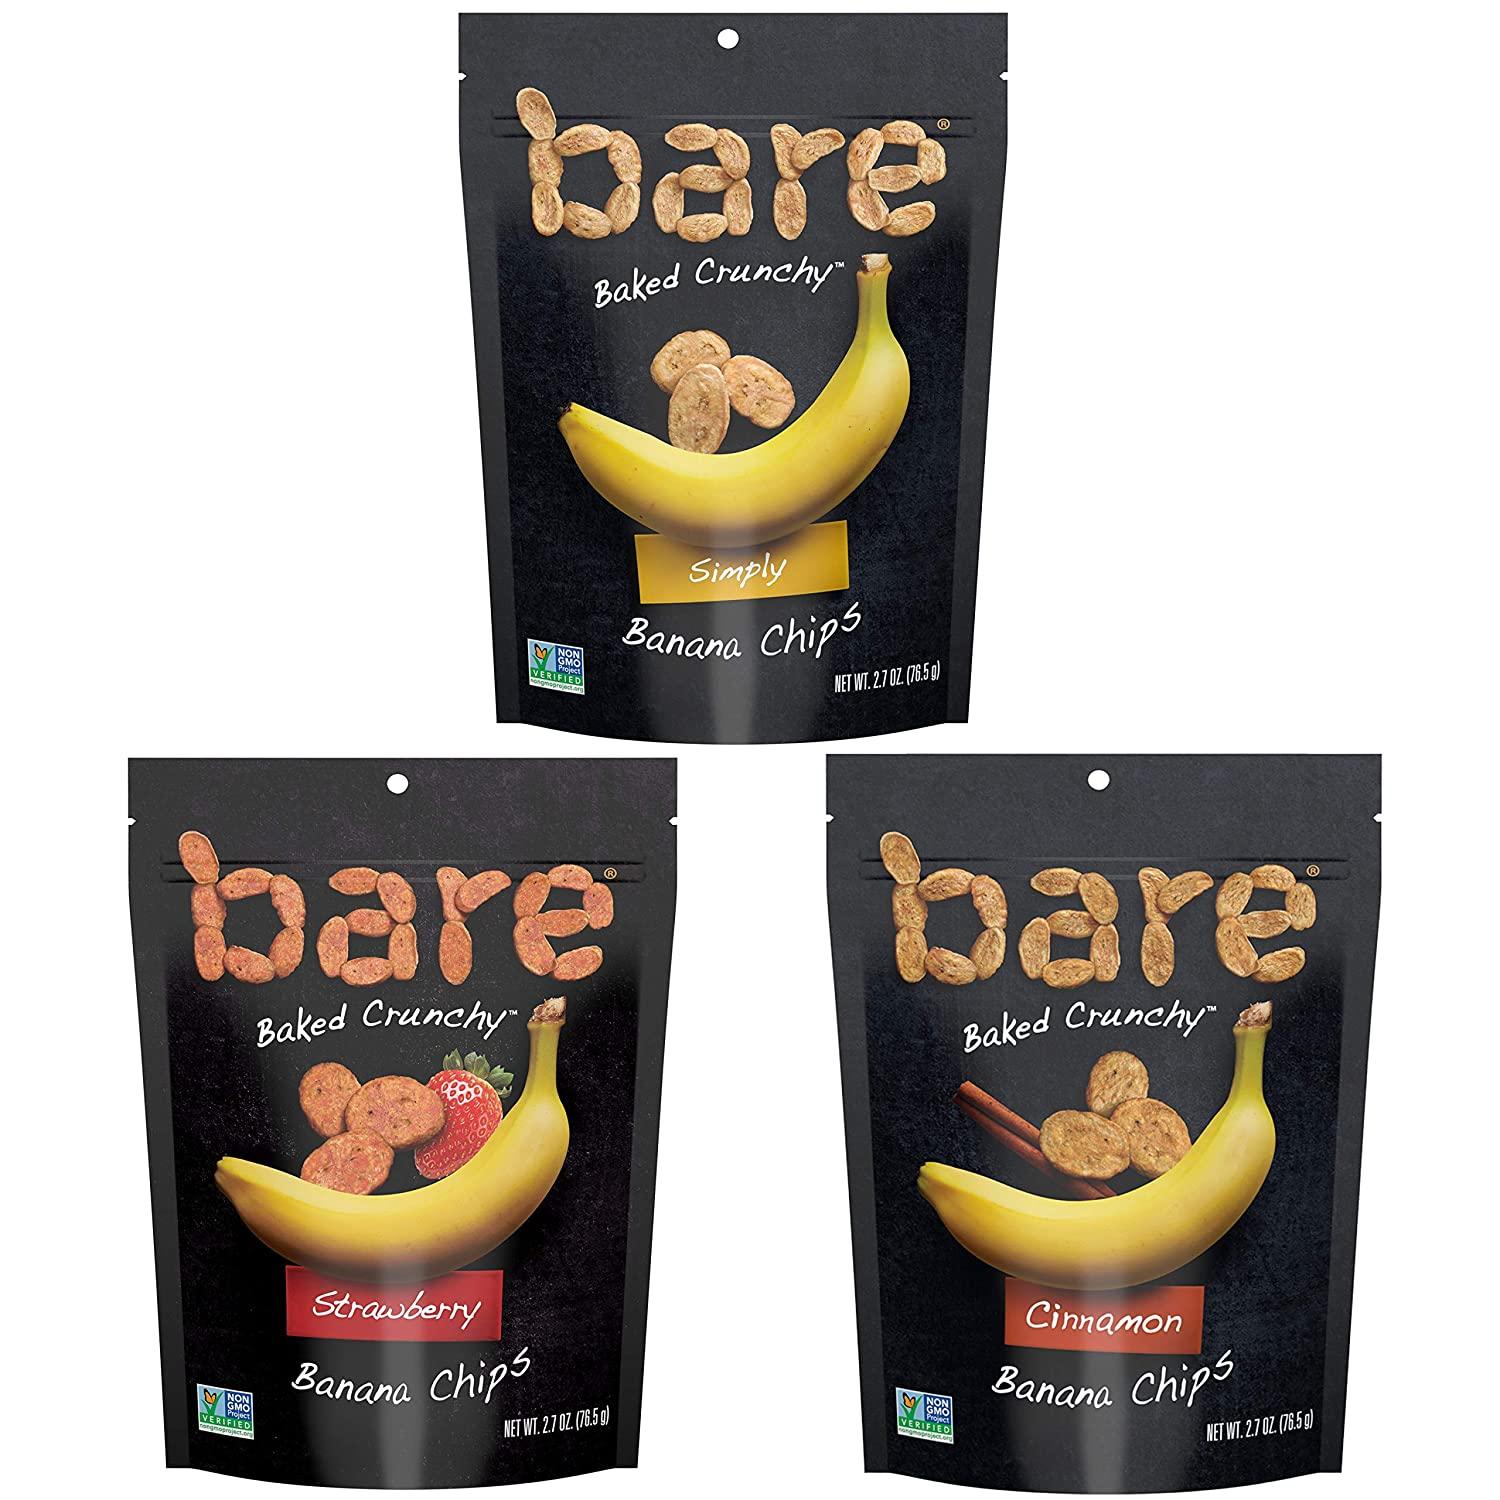 6 Bare Baked Crunchy Banana Chips Bags for $11.71